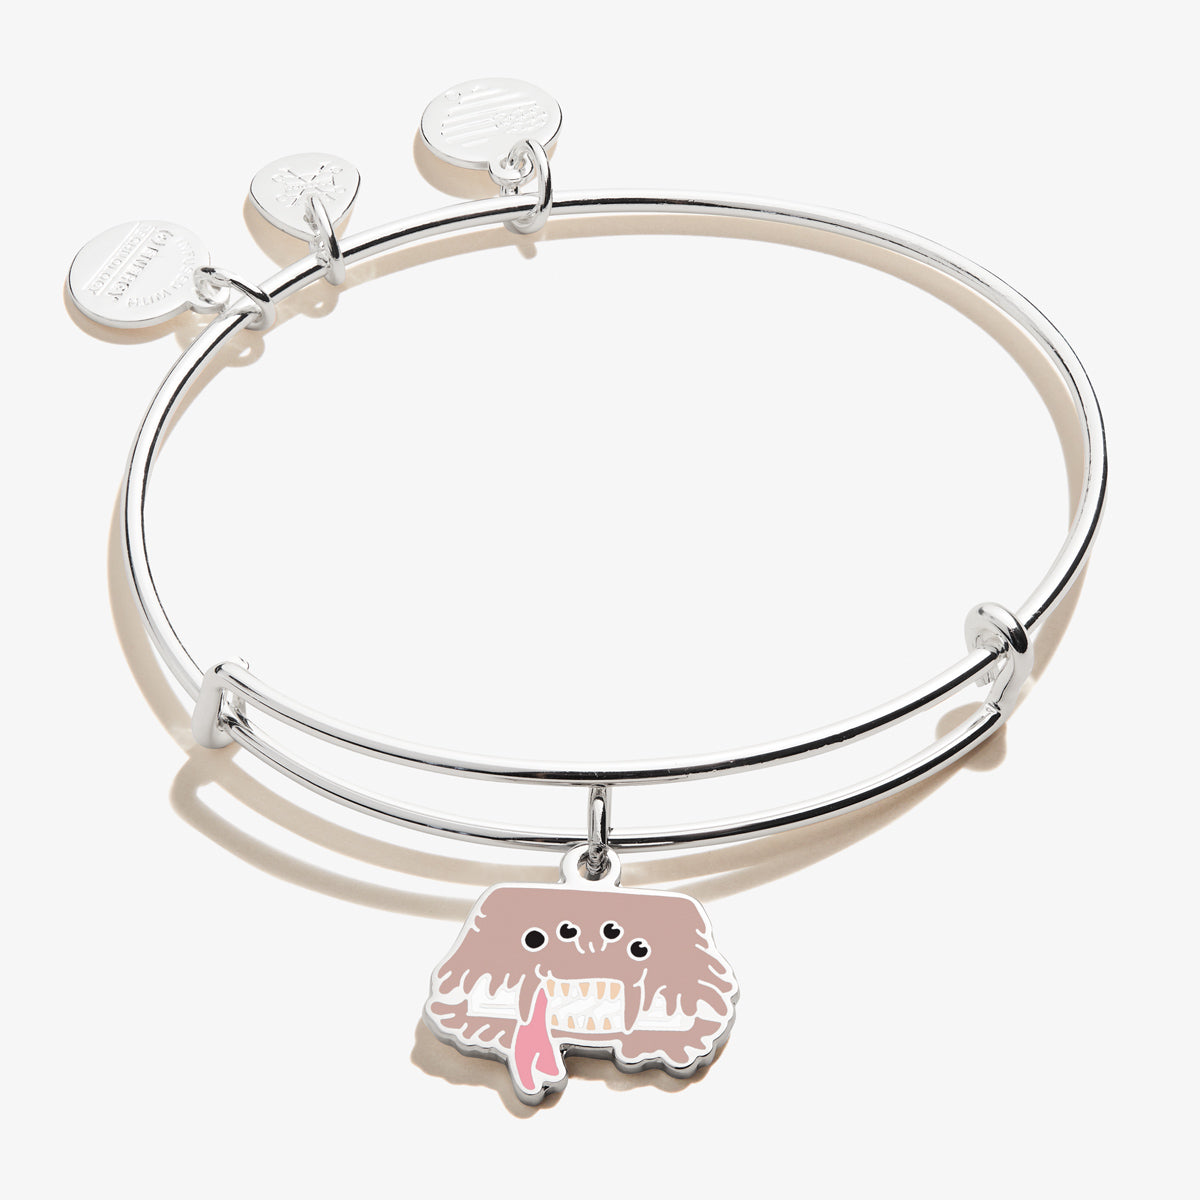 Harry Potterâ„?Monster Book of Monsters Charm Bangle